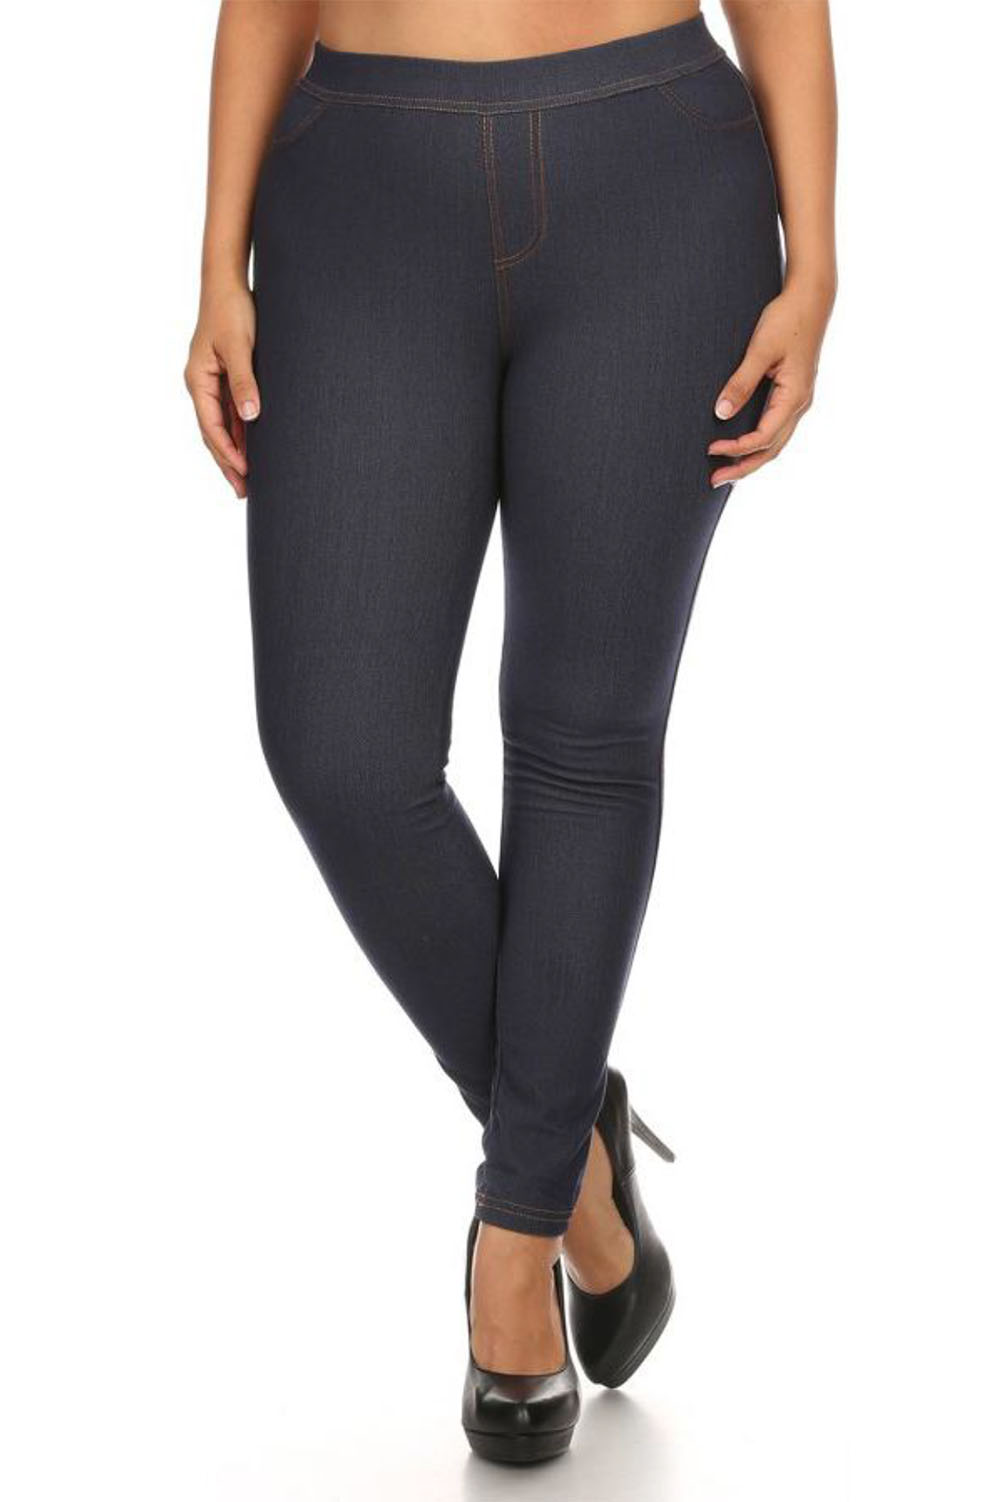 WIPLORE Jean Look Jeggings for Women Plus Size High Waist Stretch